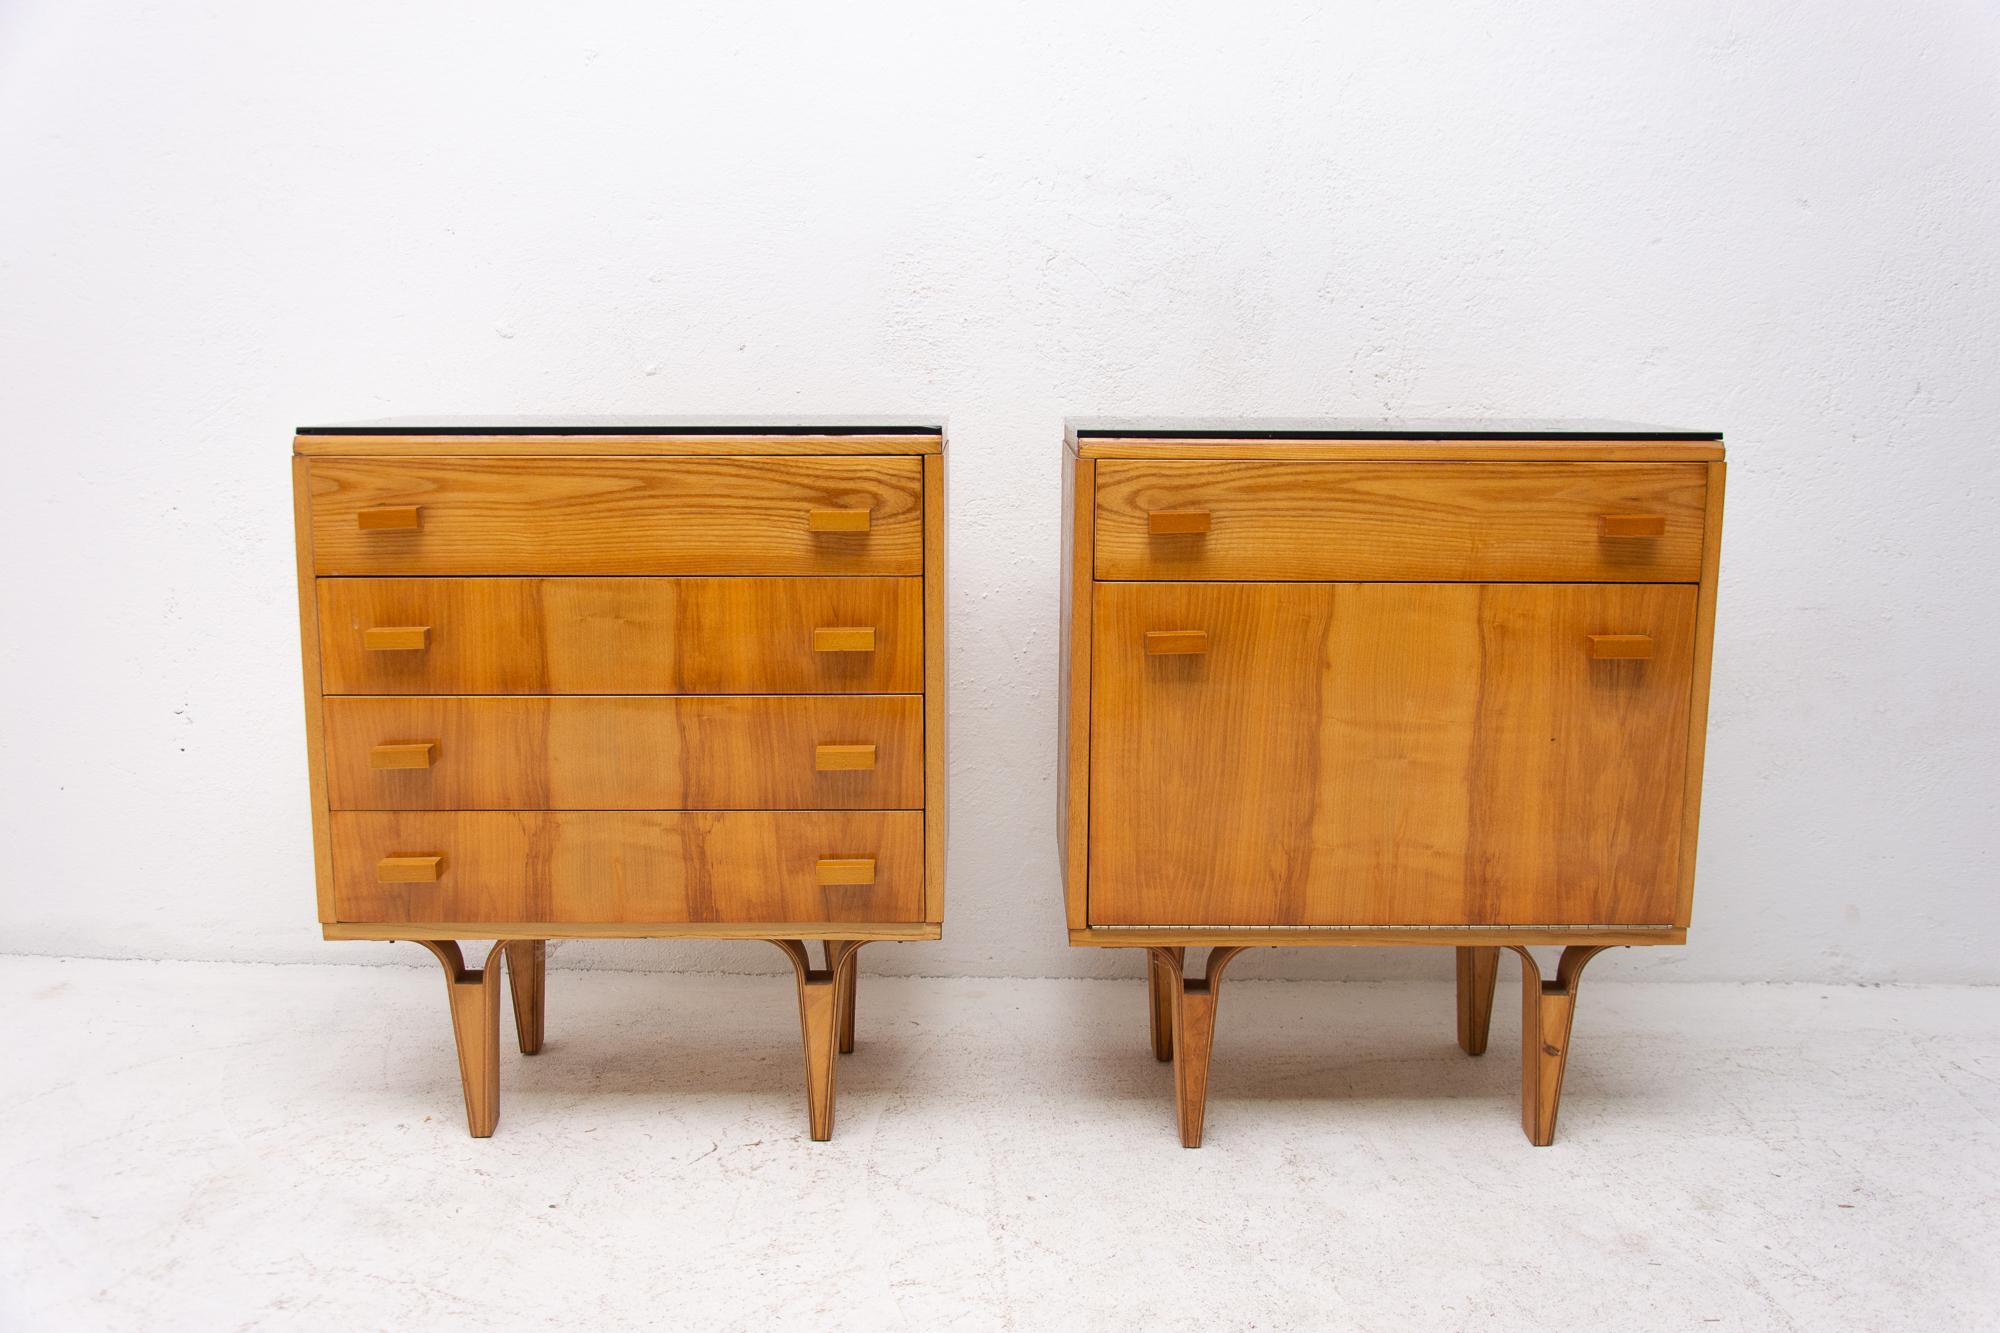 Made by furniture company “Nový Domov” in former Czechoslovakia in the 1970s.

These nightstands can be used also as a small chest of drawers. It features black glass at the top, one drawer and storage space at the bottom. Walnut veneer. Very